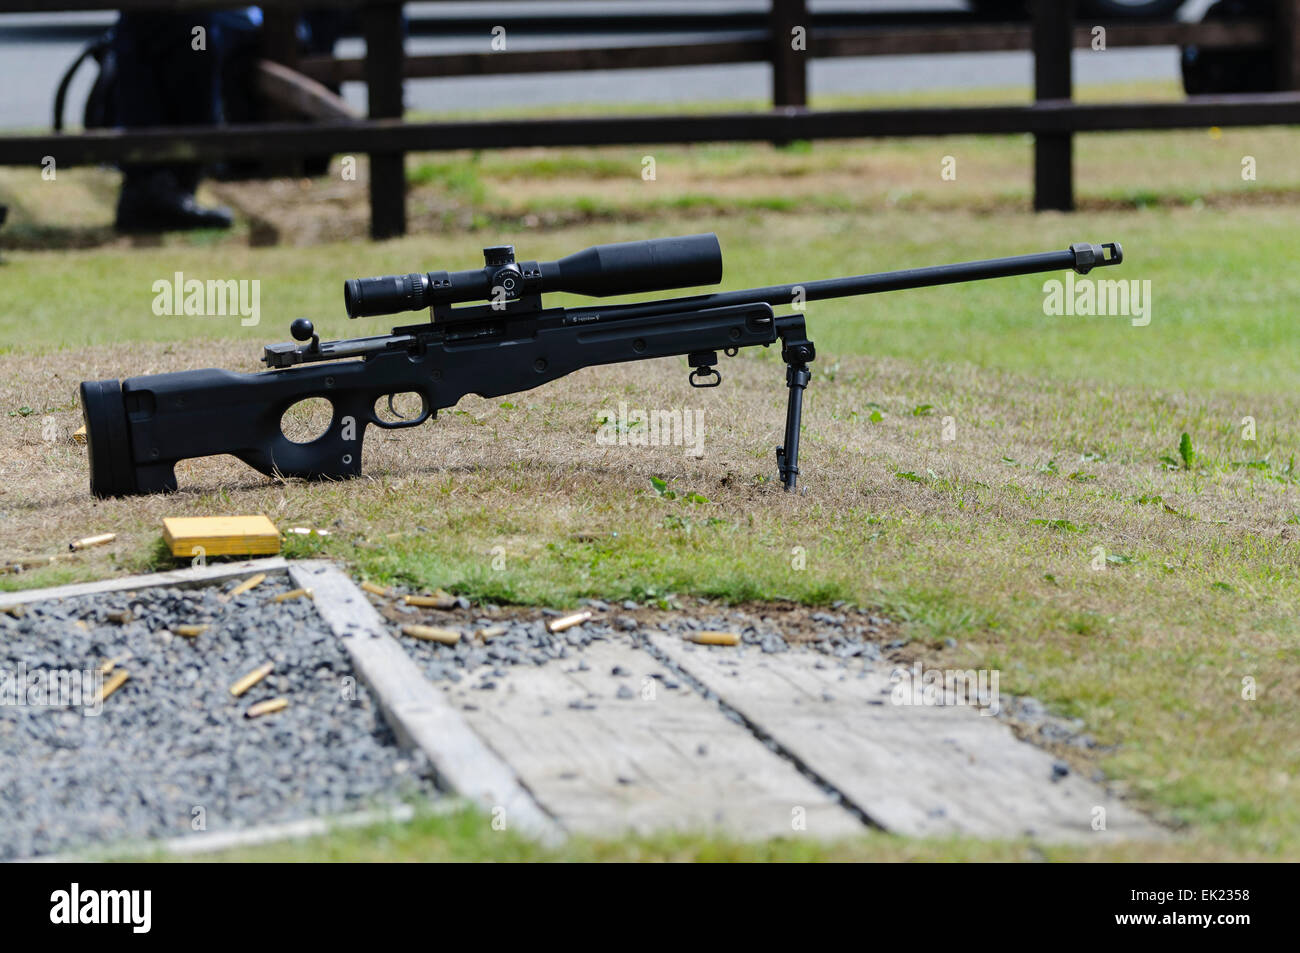 Remington 700P (police version) bolt action rifle with telescopic sights at a shooting range in Northern Ireland during a police training exercise. Stock Photo